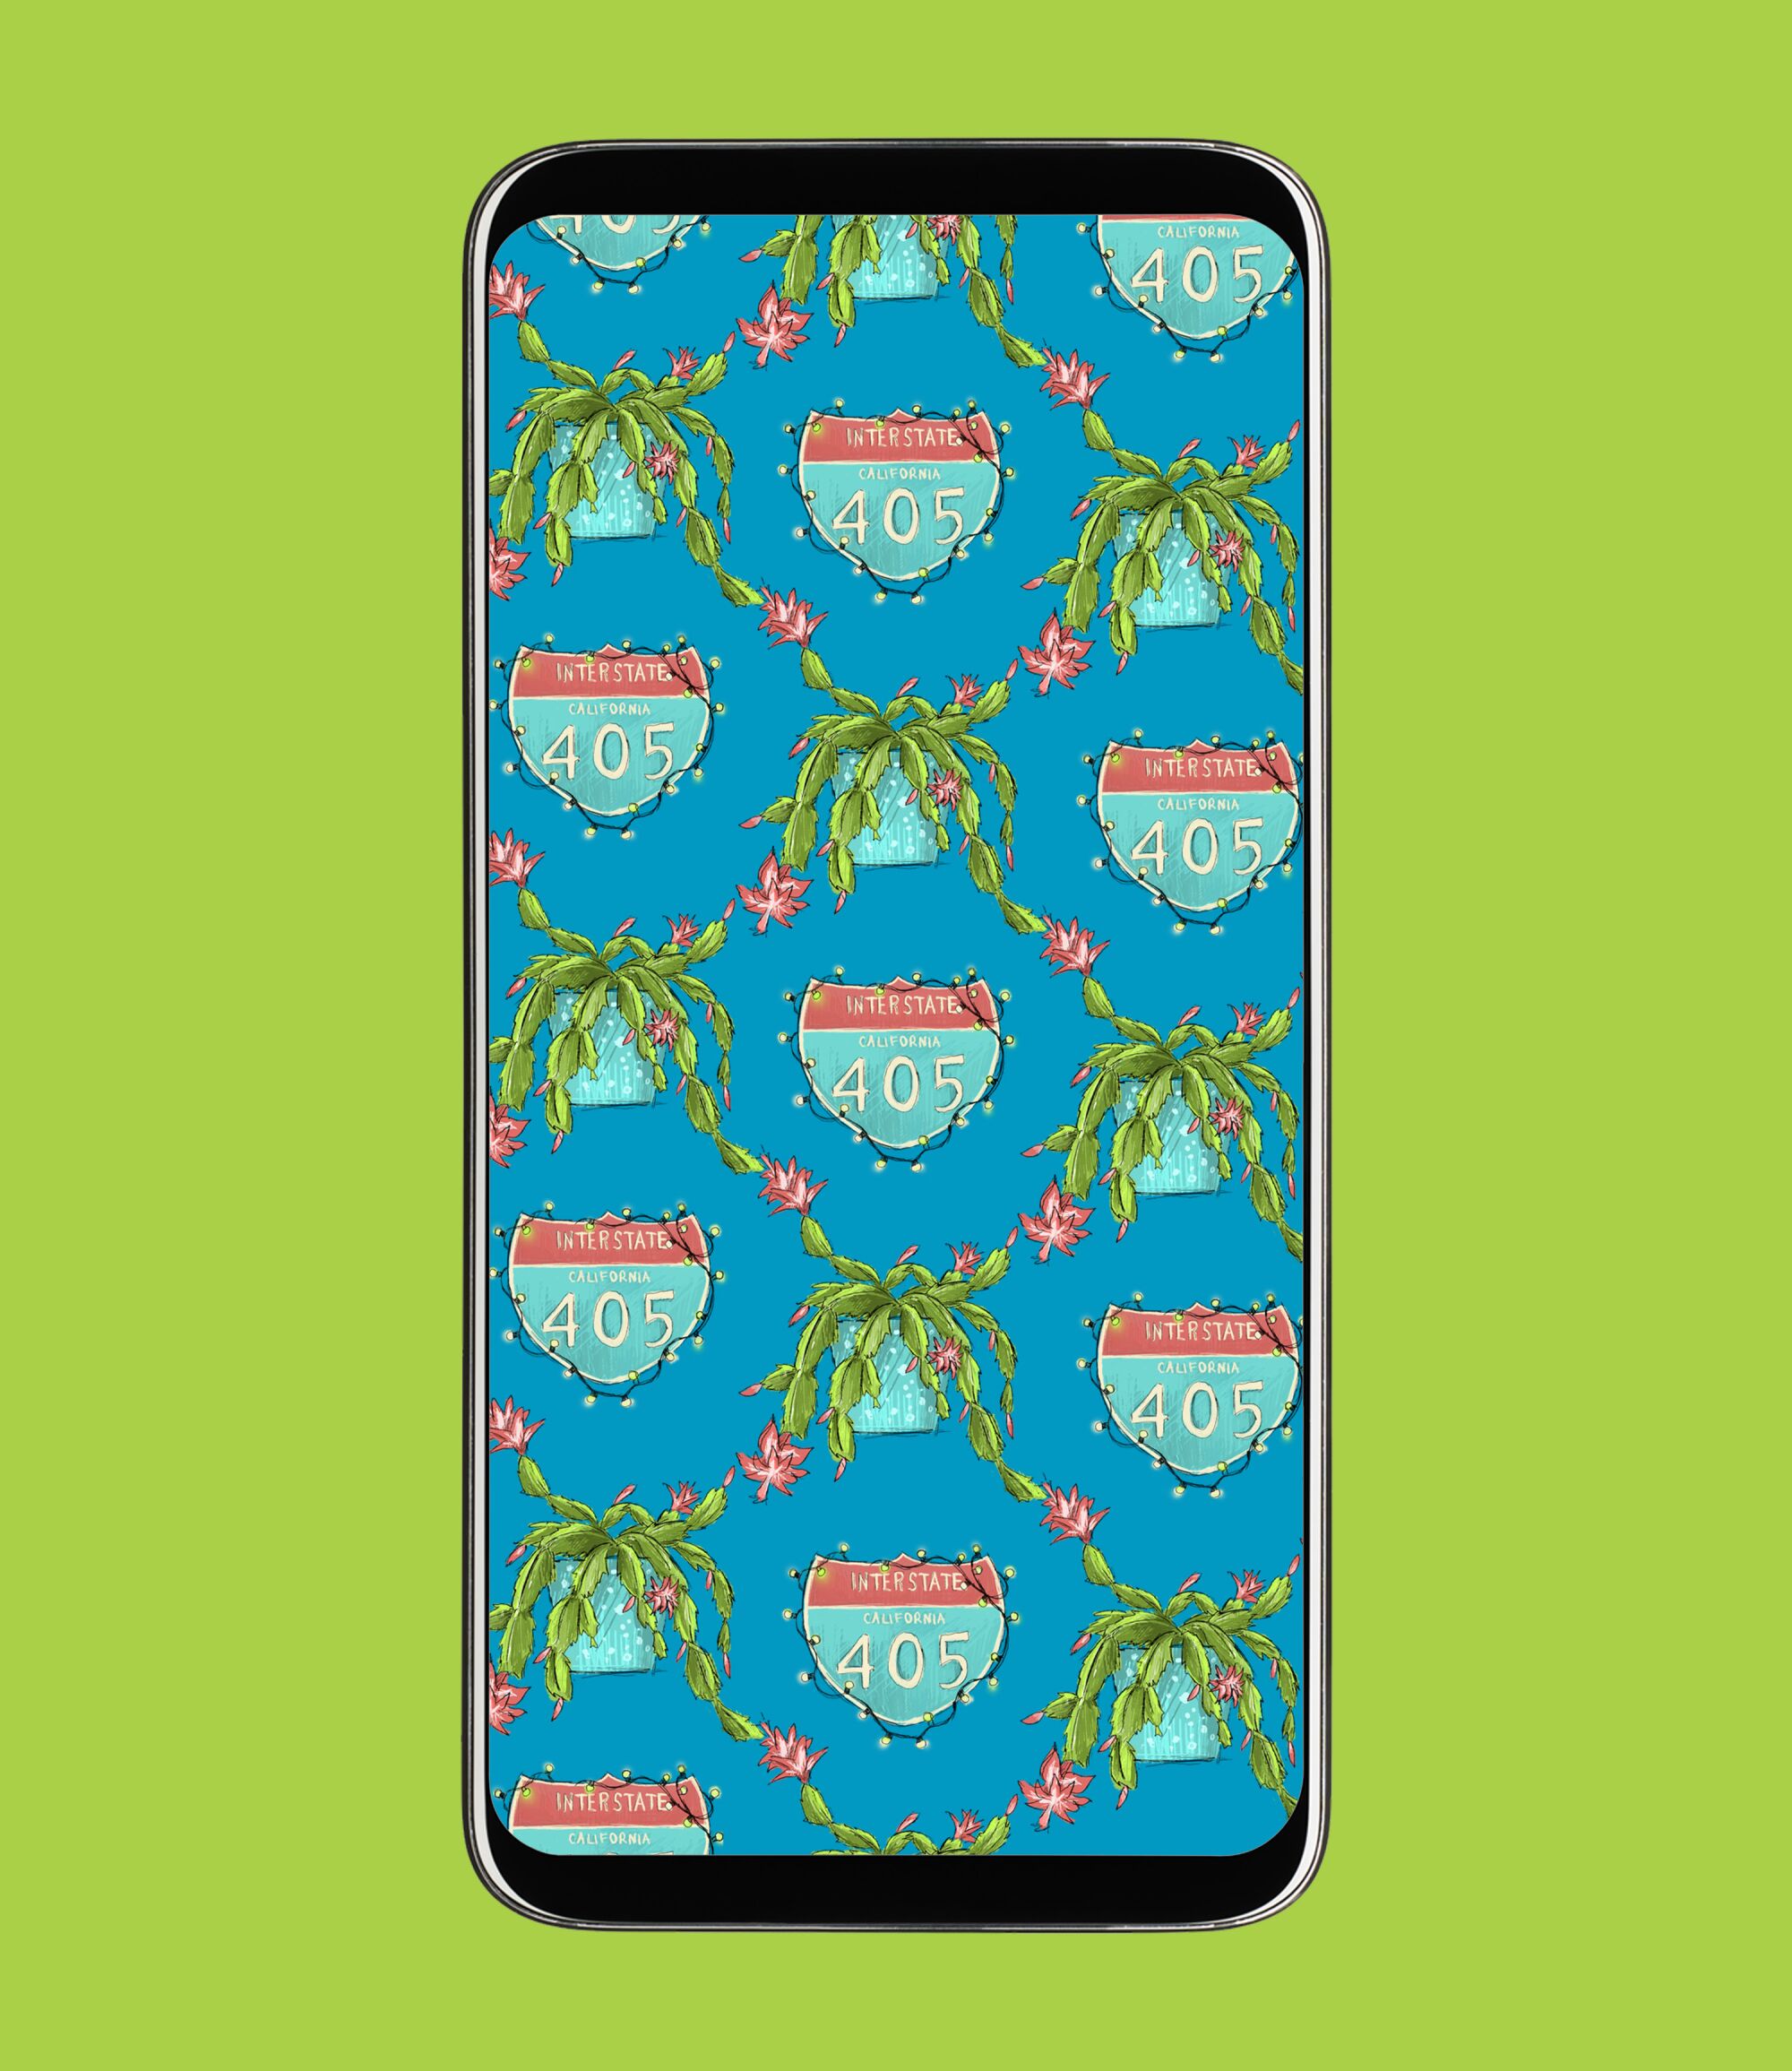 Mockup of a phone background with a Christmas illustration.